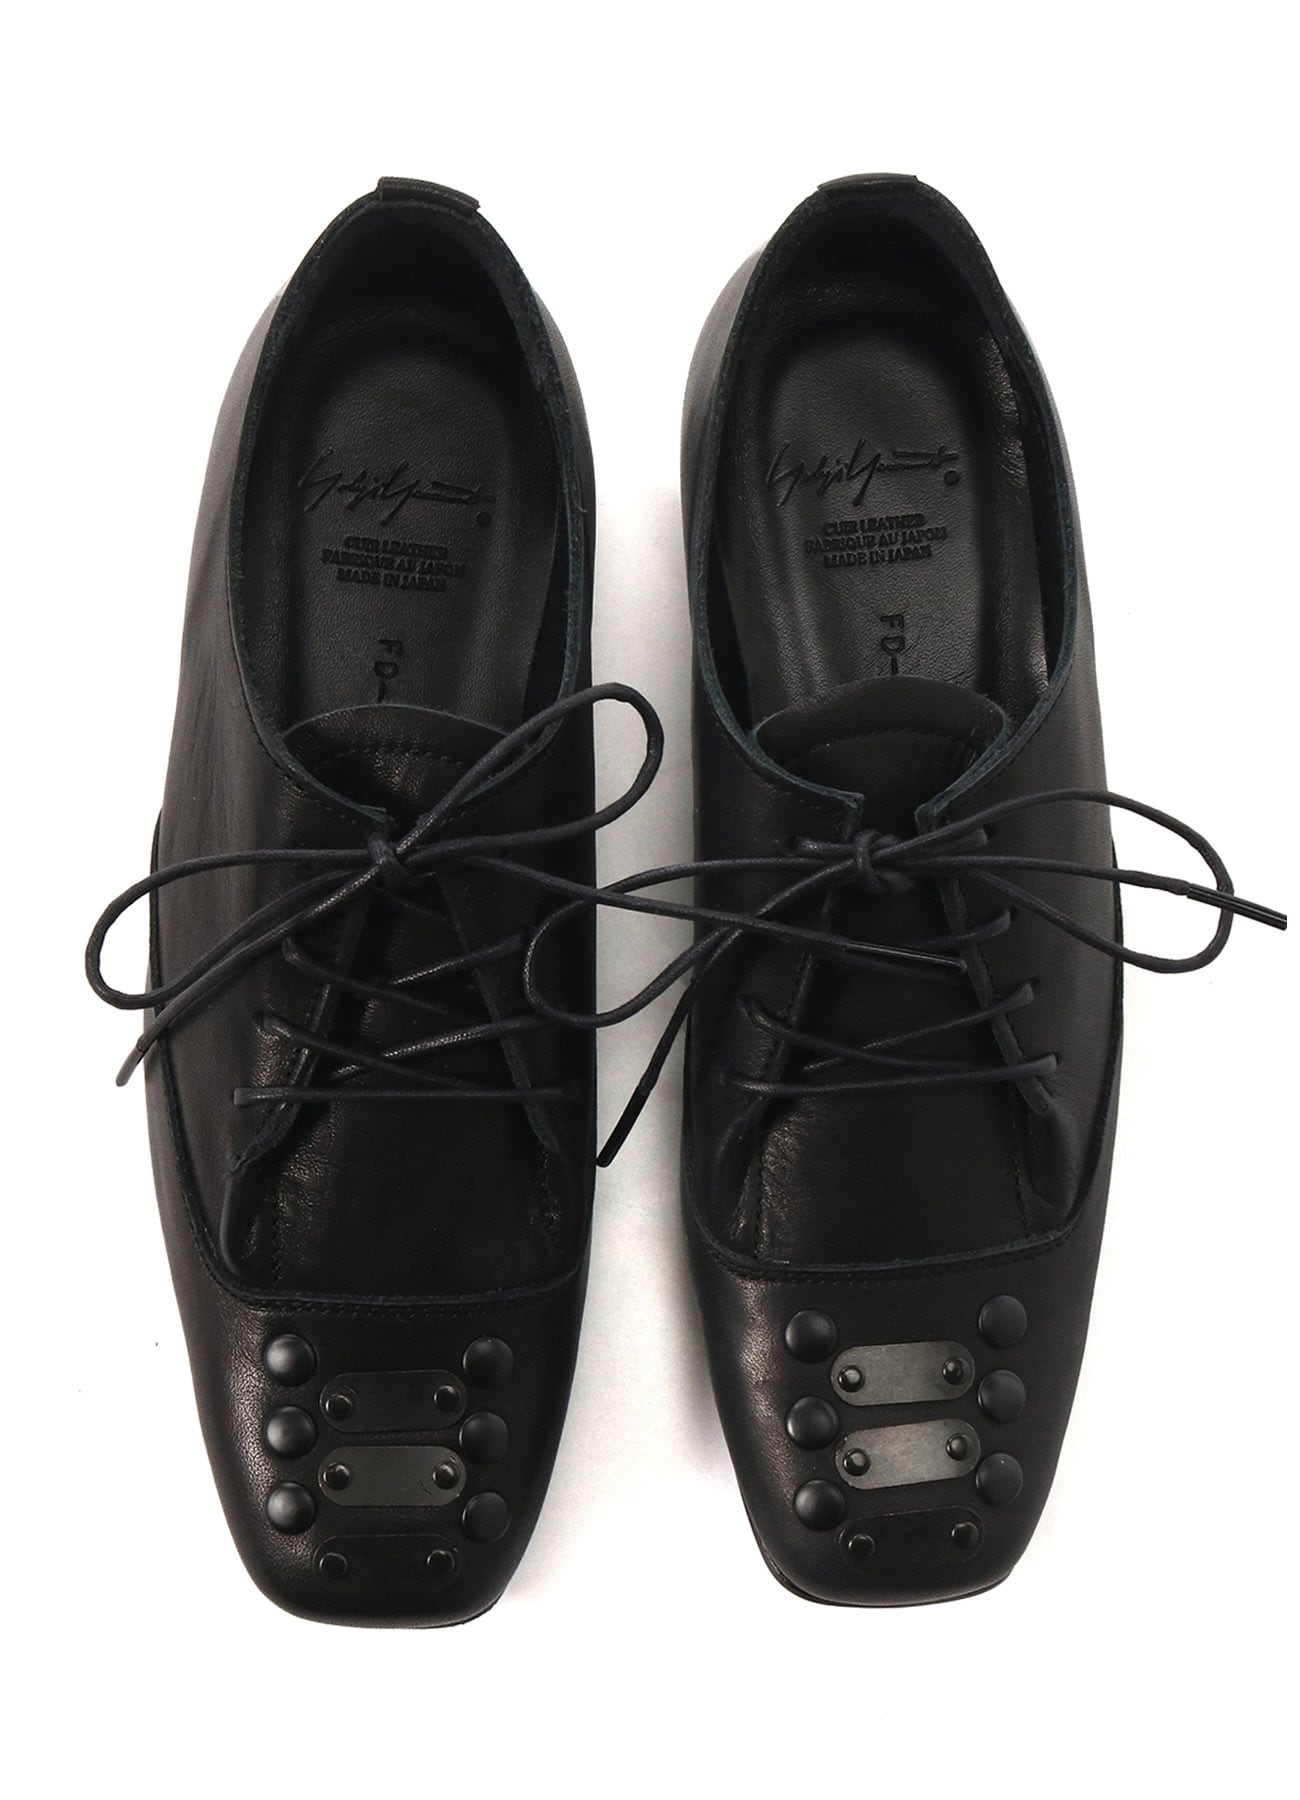 MATTE SMOOTH LEATHER STUDS LACE UP SHOES